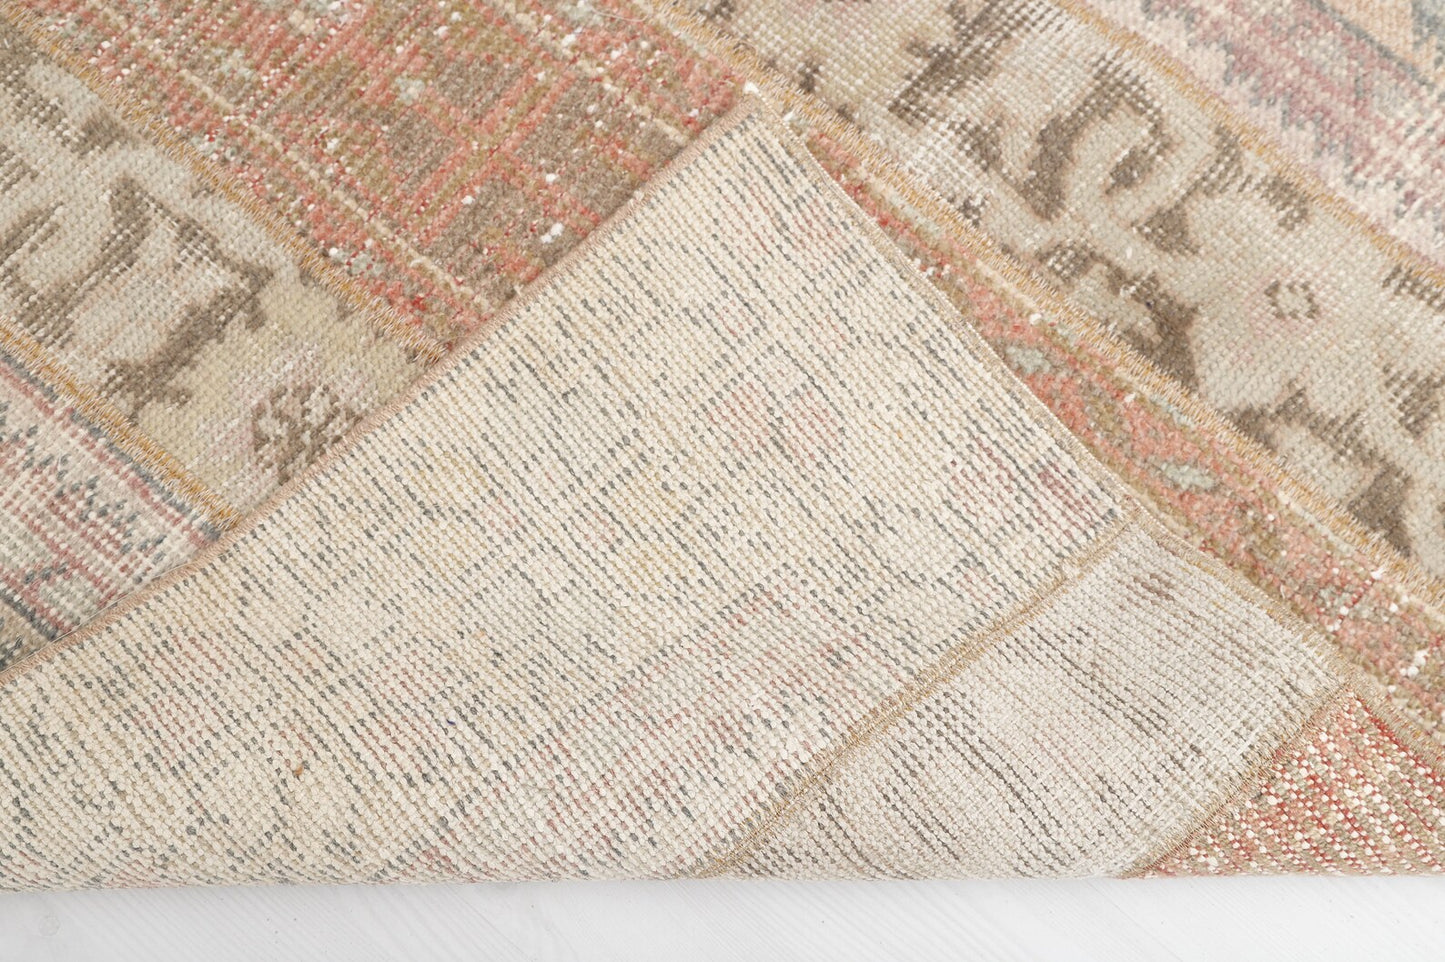 Gorgeous vintage rug from Turkey with earth toned colors and intricate, yet subtle designs. Measures 3.4 x 4.7' and made from 50% cotton and 50% wool. This Turkish rug has been professionally washed before we received it so it is 100% clean and ready to use. 